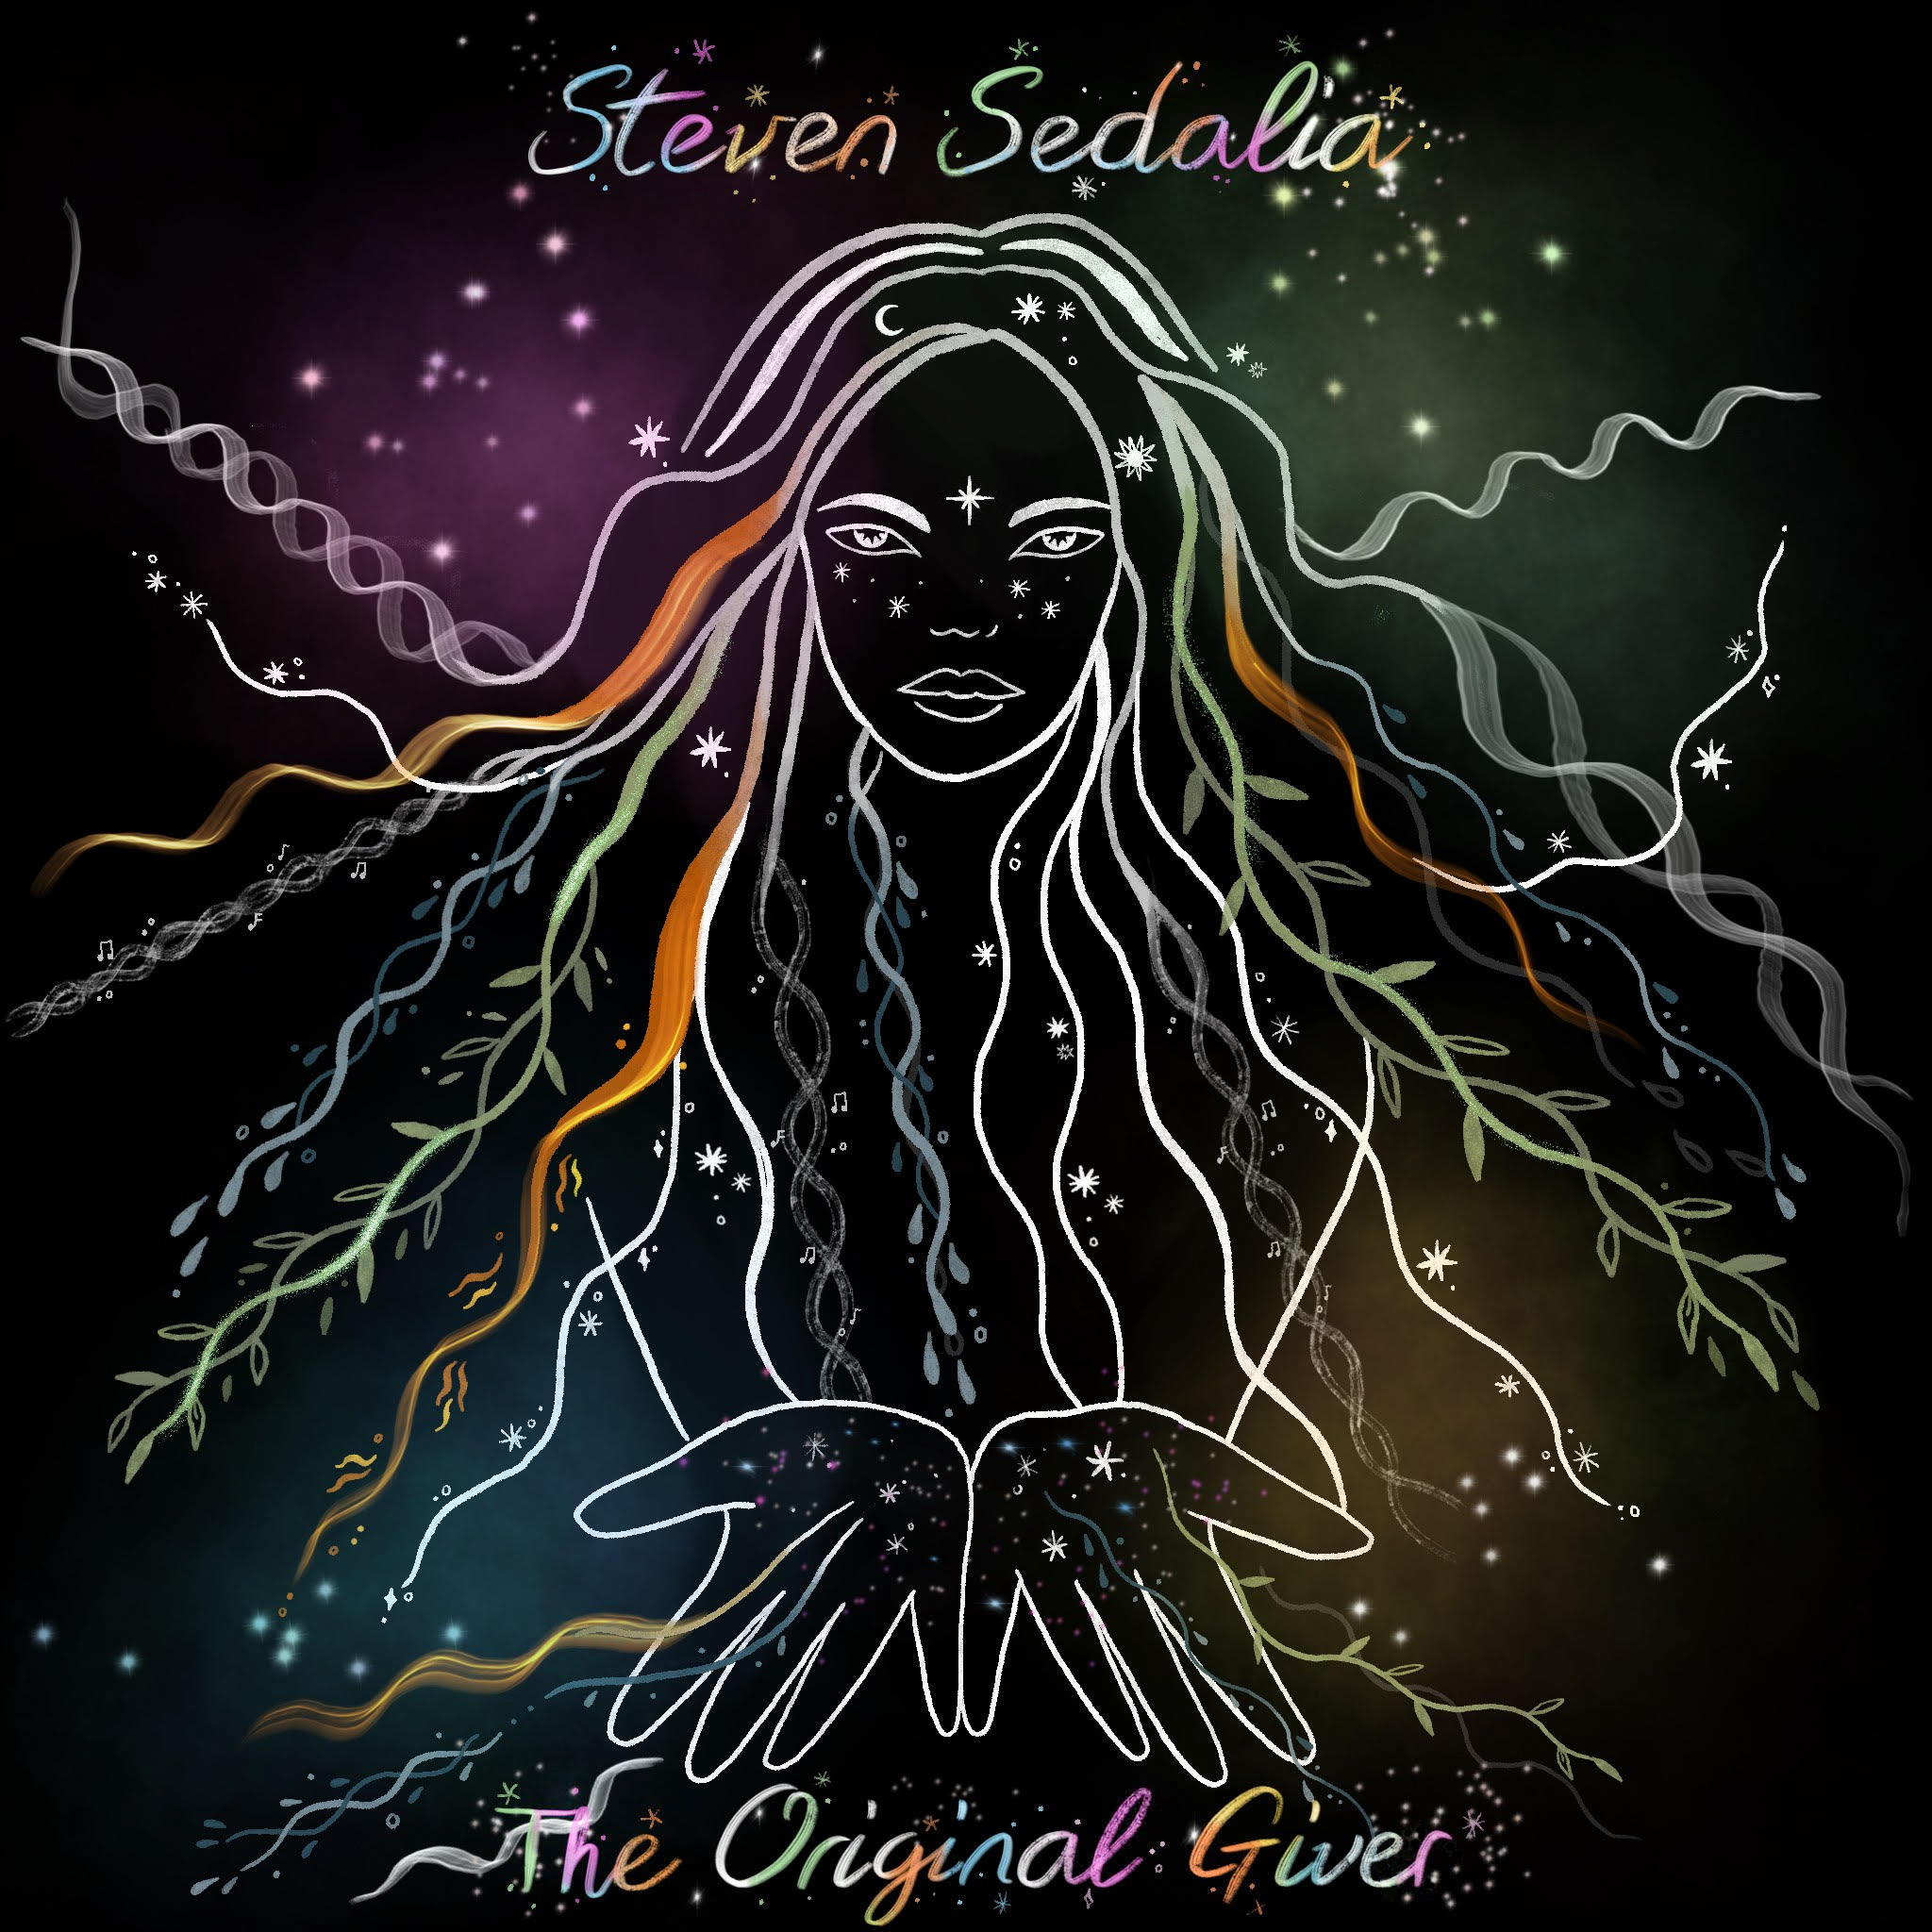 Steven Sedalia releases EP The Original Giver, a Cosmology of Sound and the Soul